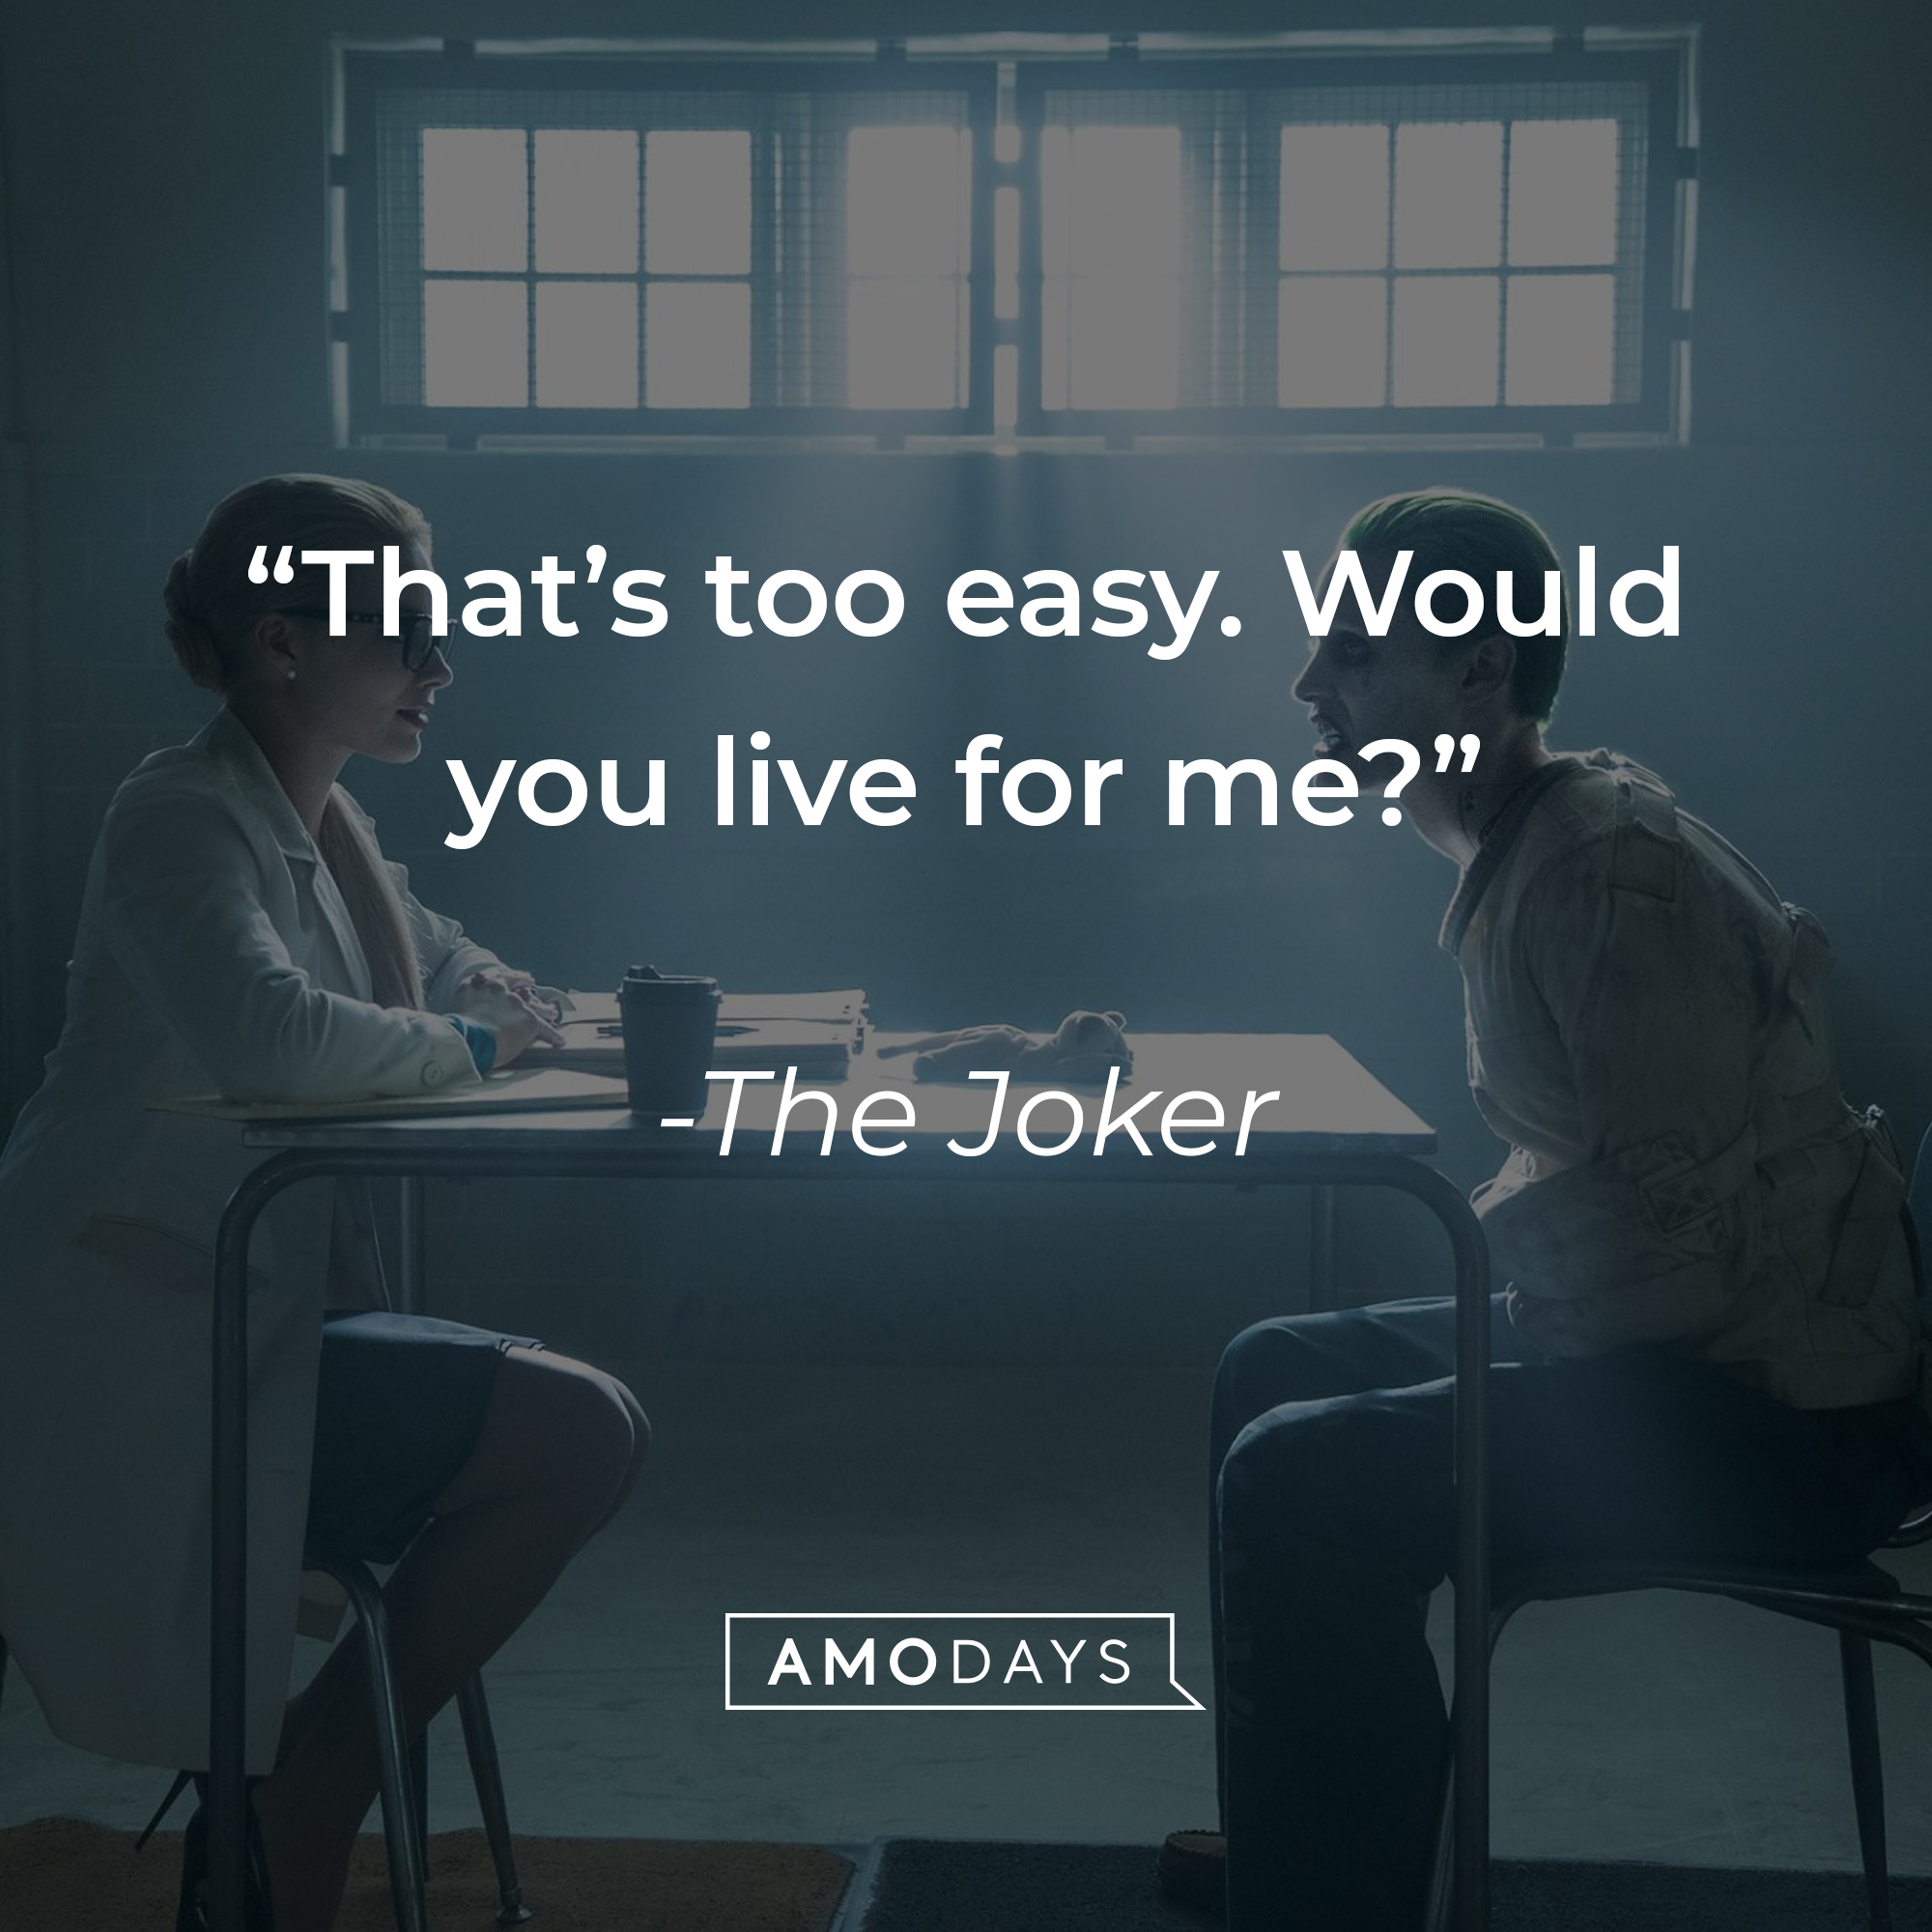 The Joker's quote: "That's too easy. Would you live for me?" | Source: facebook.com/thesuicidesquad